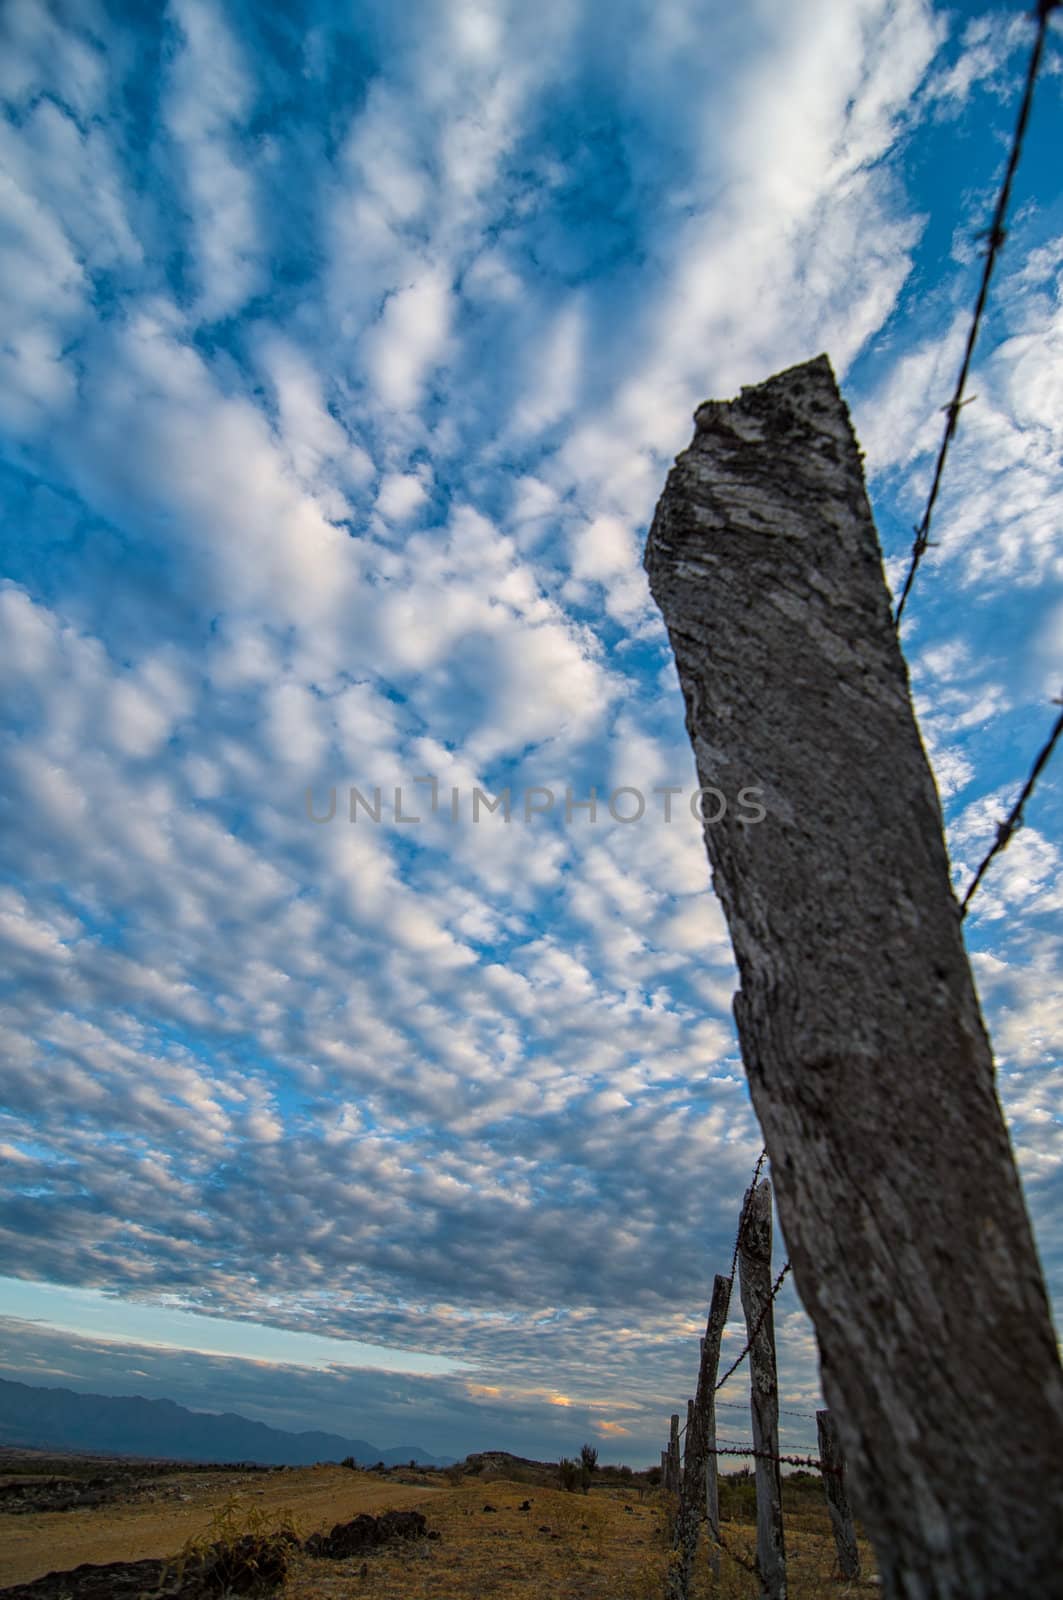 Fence post in a desert with a blue sky with dramatic clouds